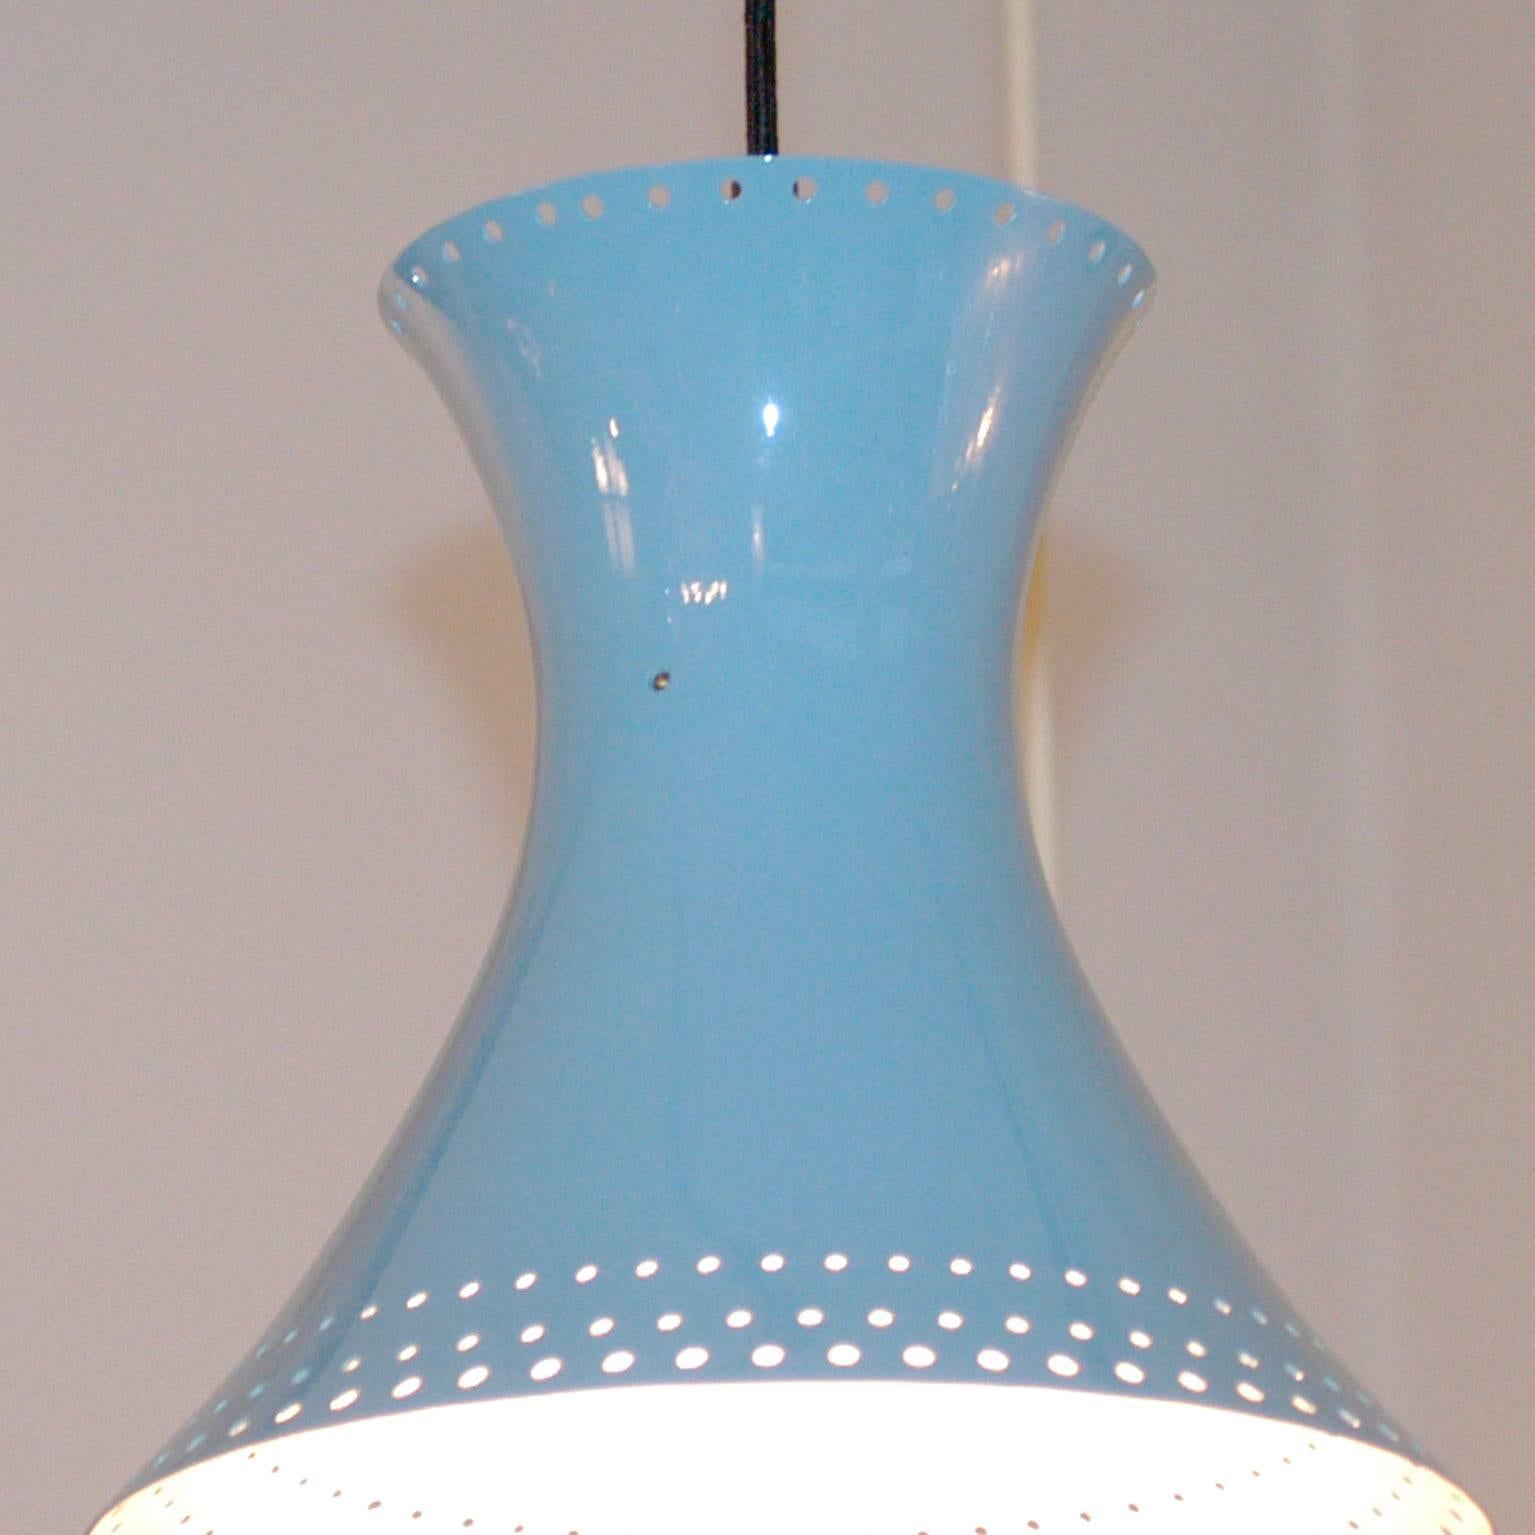 Lacquered Blue Laquered Metal Austrian Midcentury Diabolo Hanging Lamp by J. T. Kalmar For Sale